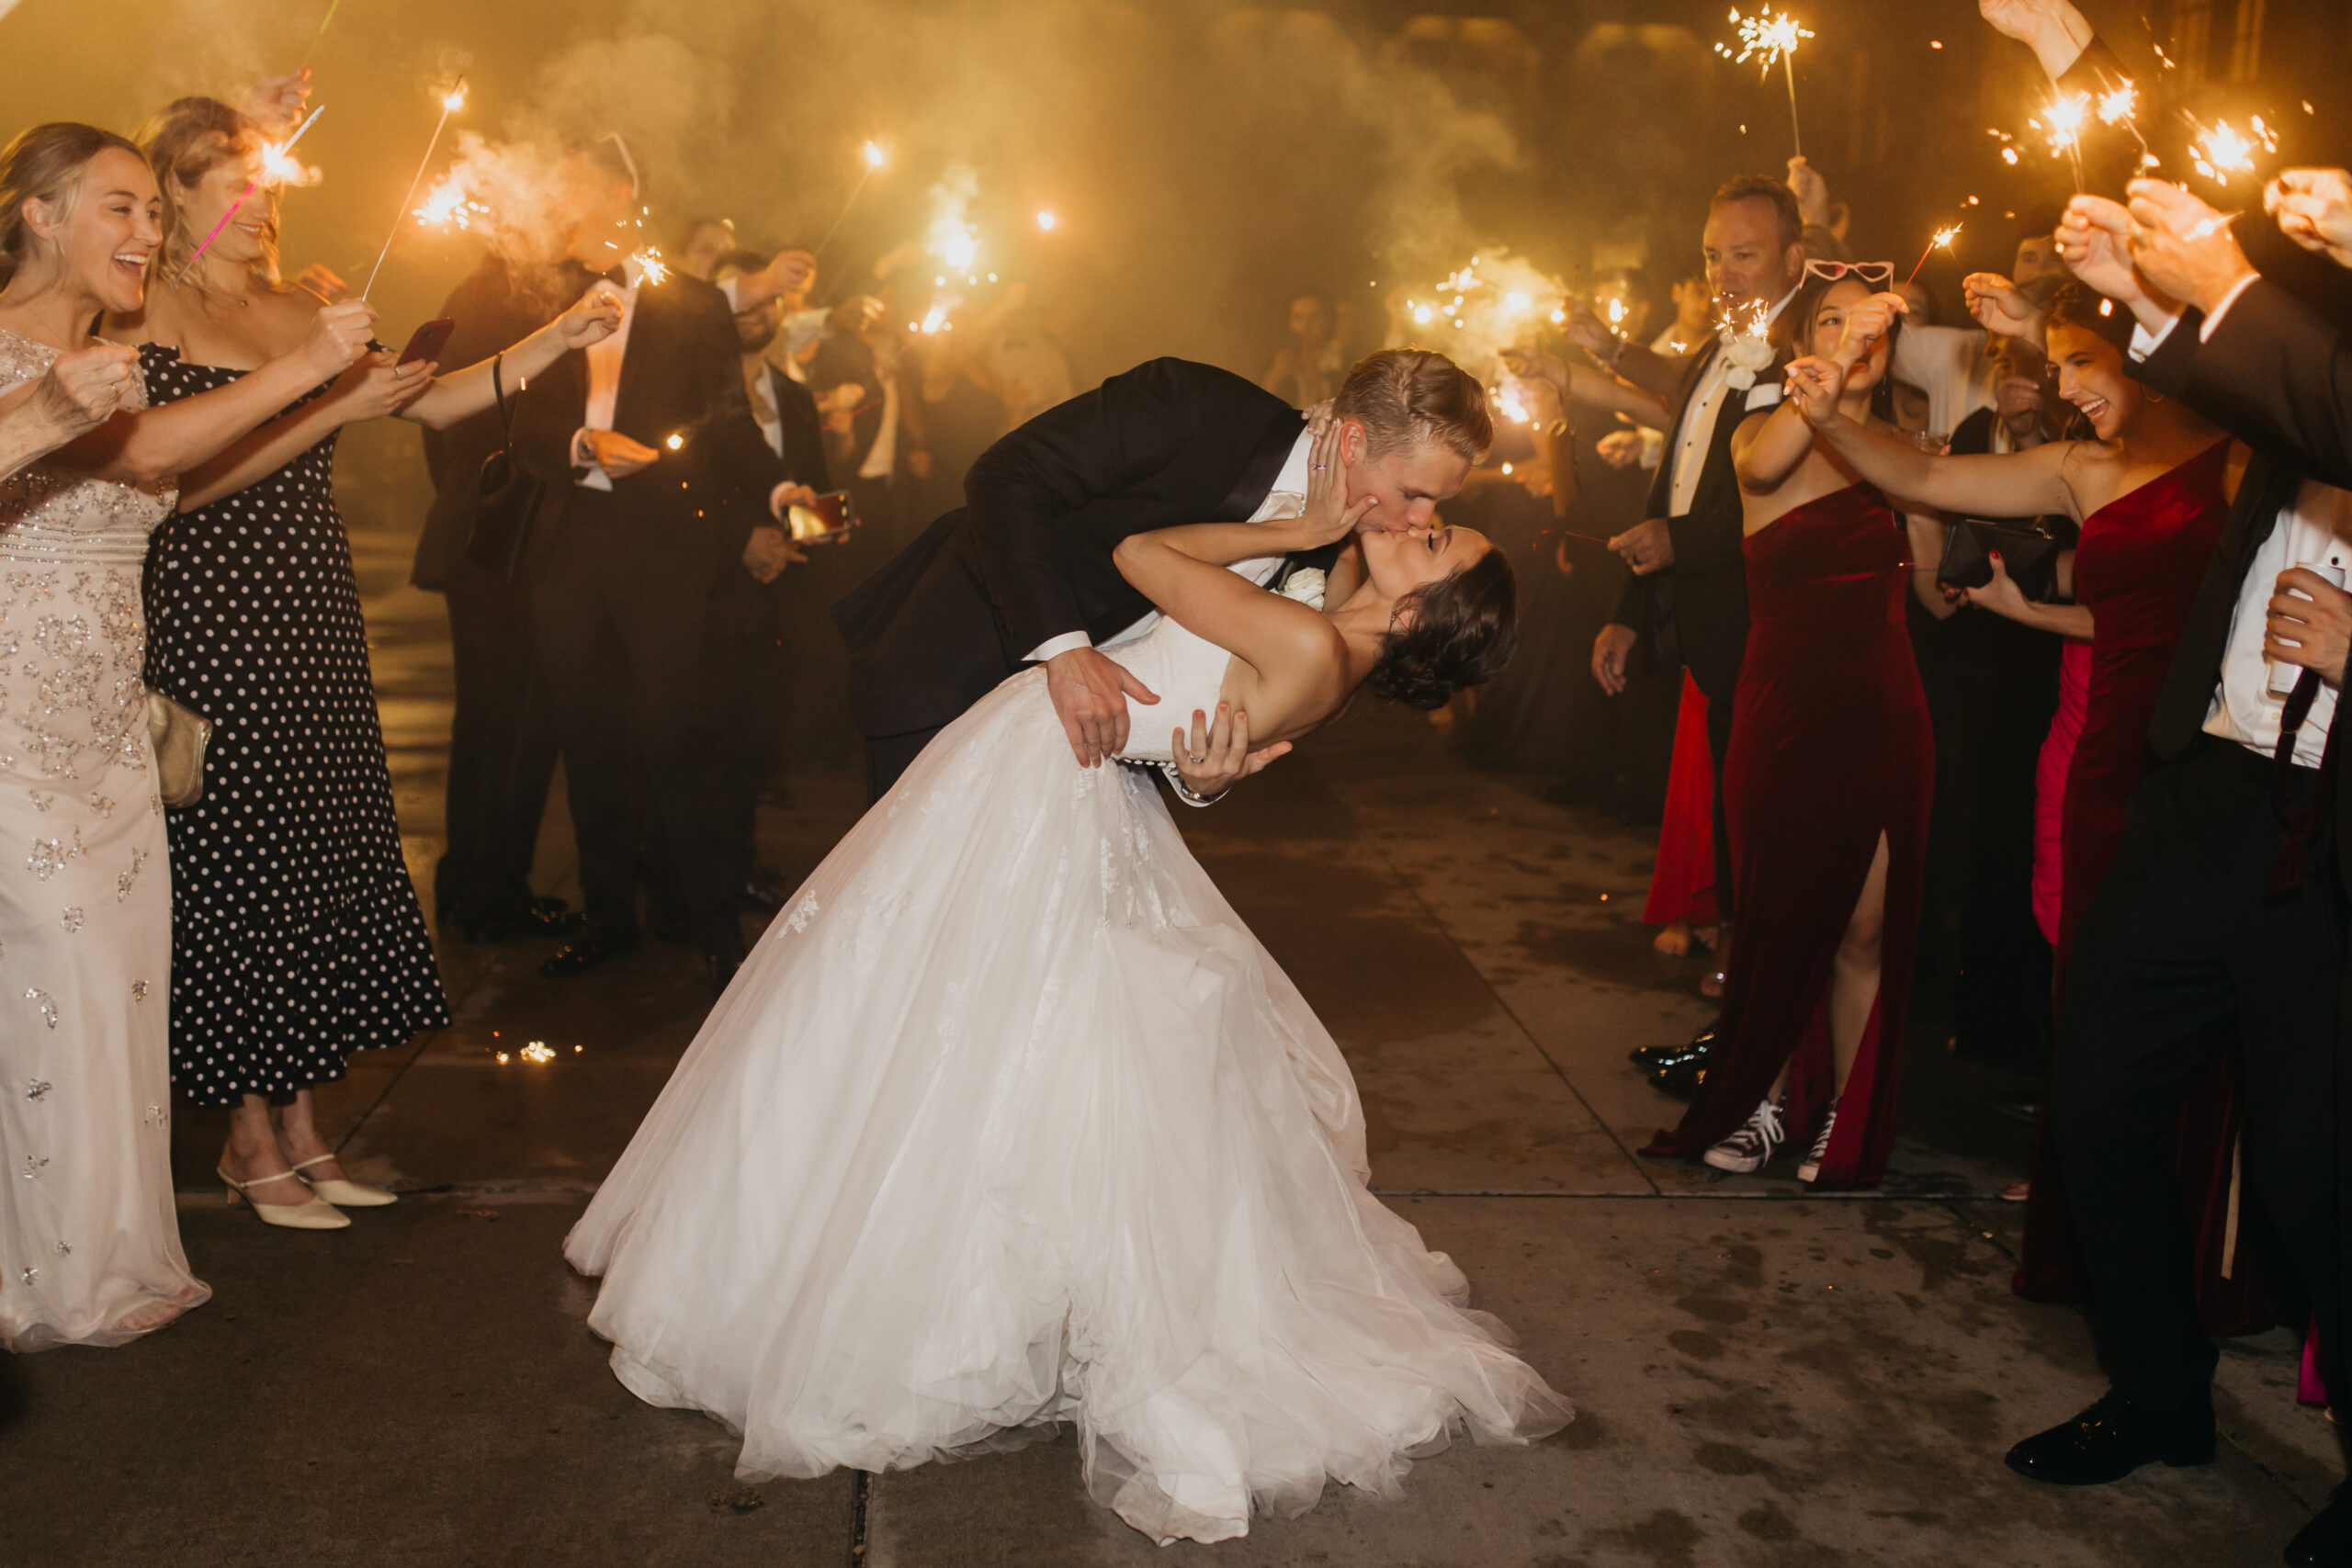 A photo of the newlyweds sharing a lovely kiss while being surrounded by their guests with sparklers